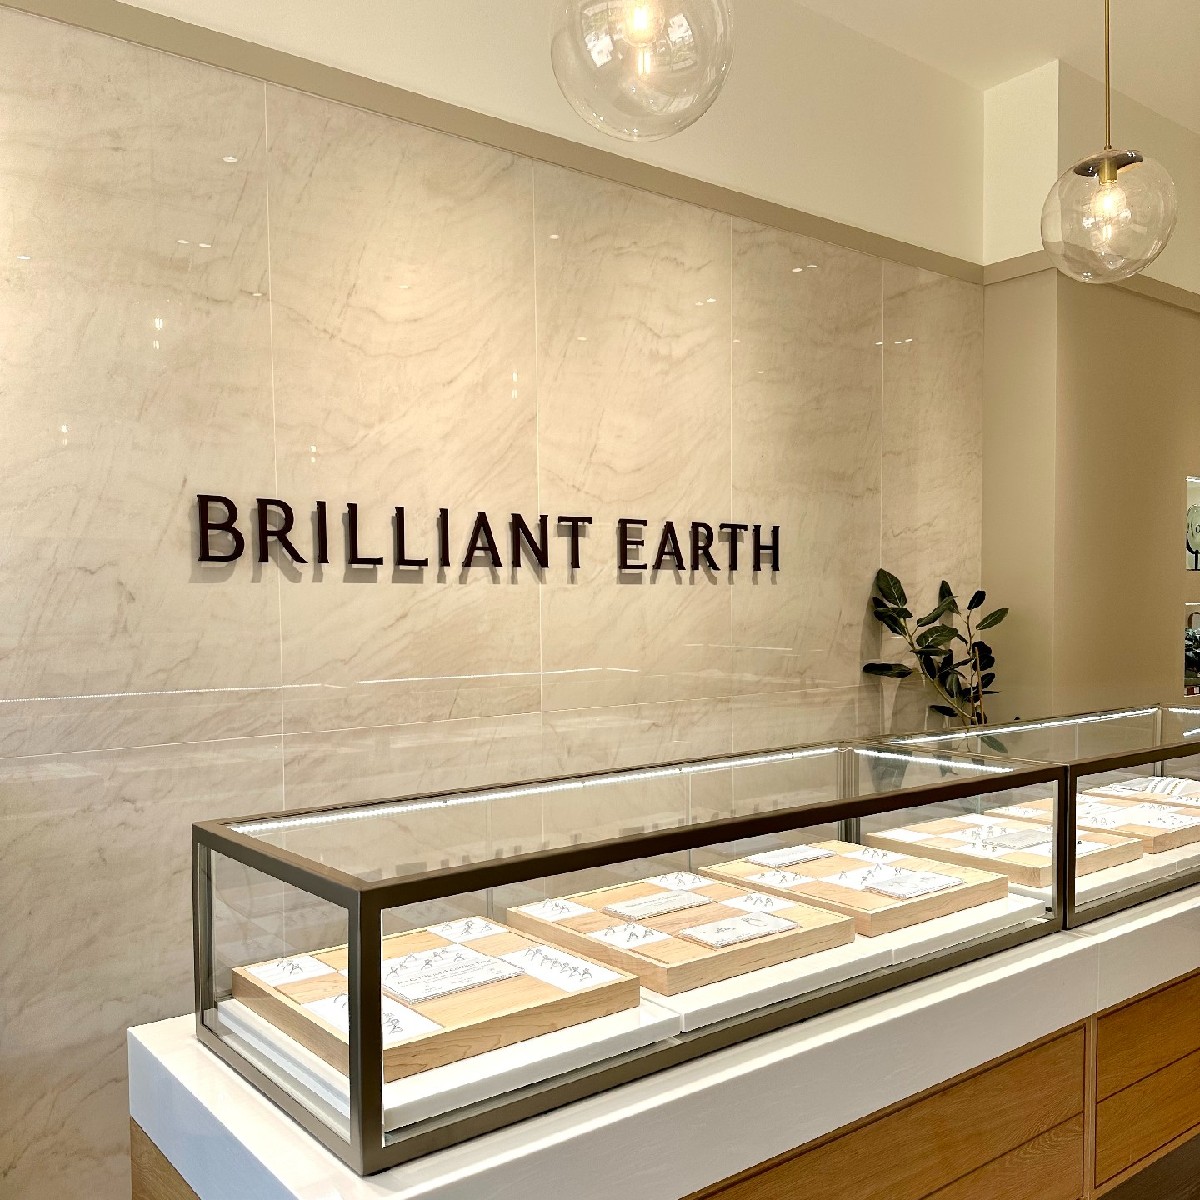 Easy, breezy, and brilliantly beautiful. 🌿✨💍

@BrilliantEarth's ethically sourced fine jewelry is the perfect addition to your big day or any day.
#ShopMarylandPlaza